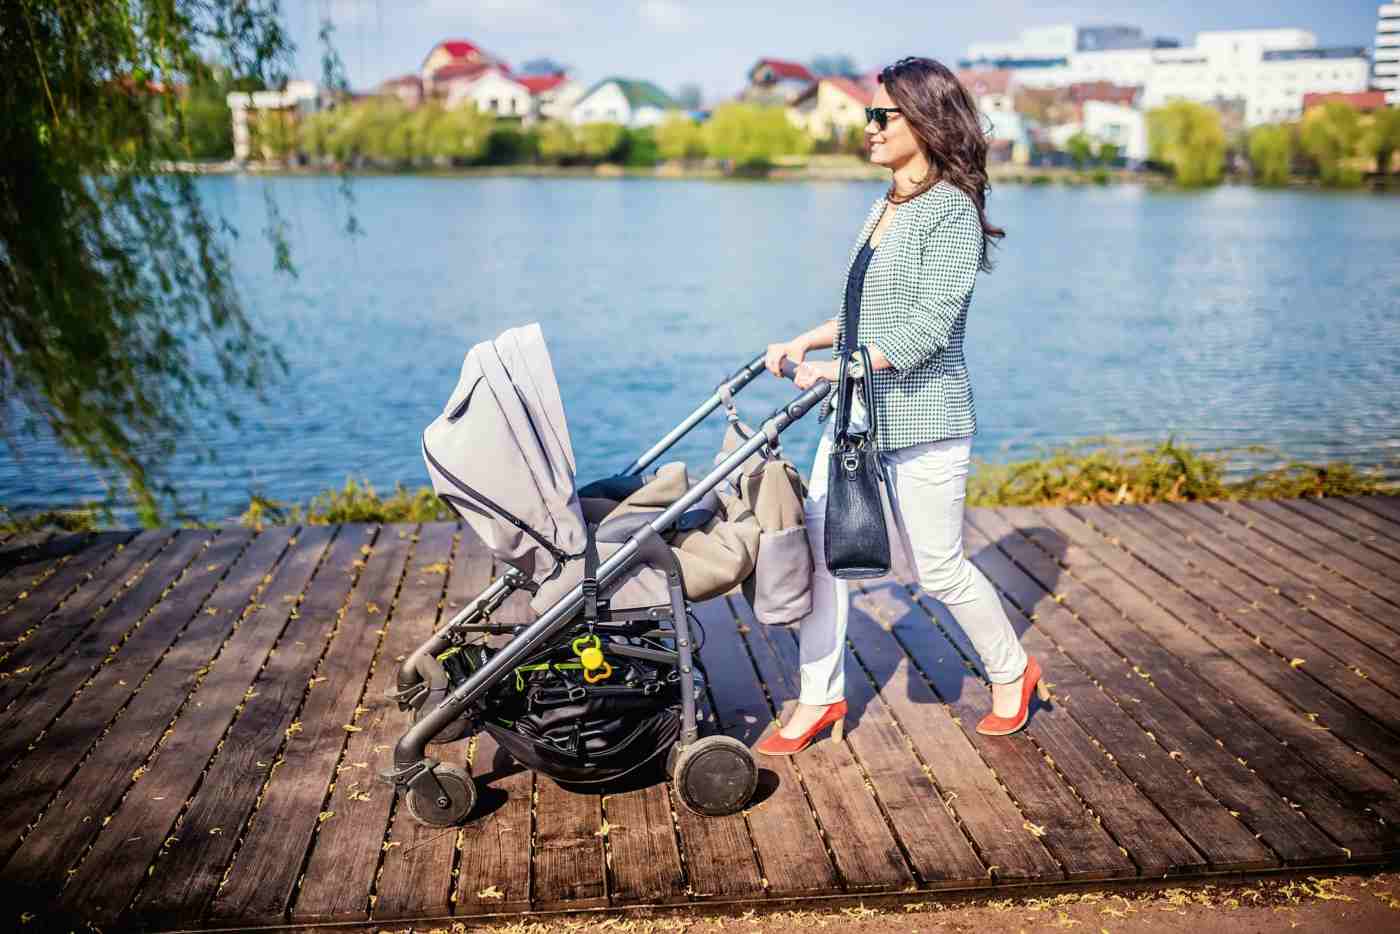 Buying a Pram for comfort and safety for the baby